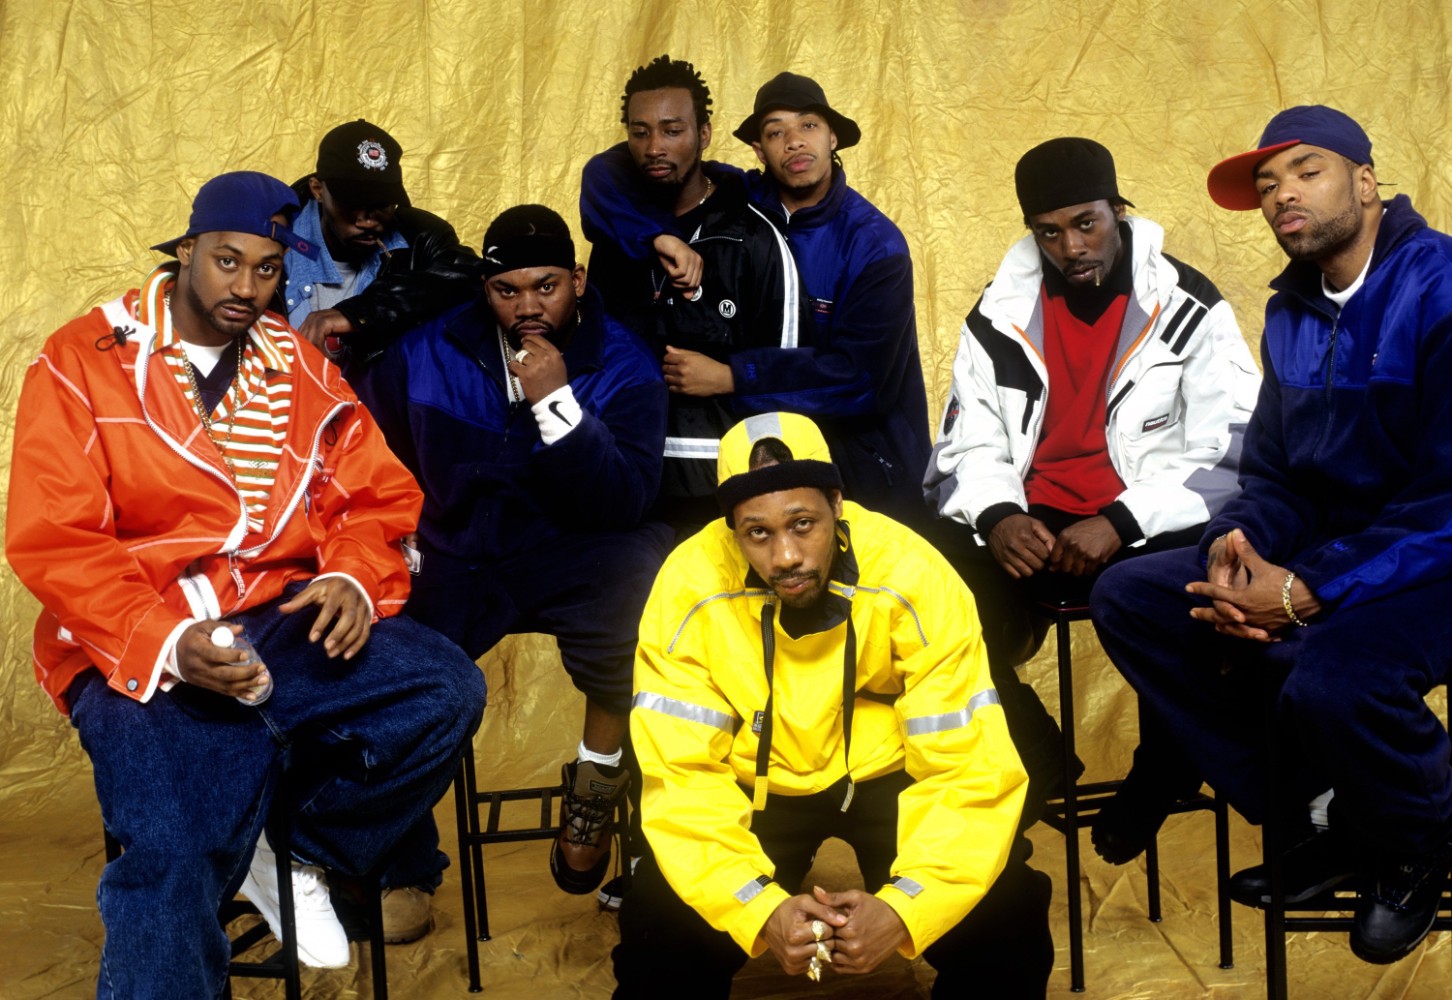 There is now a “Wu-Tang Clan District” in New York | DJMag.com